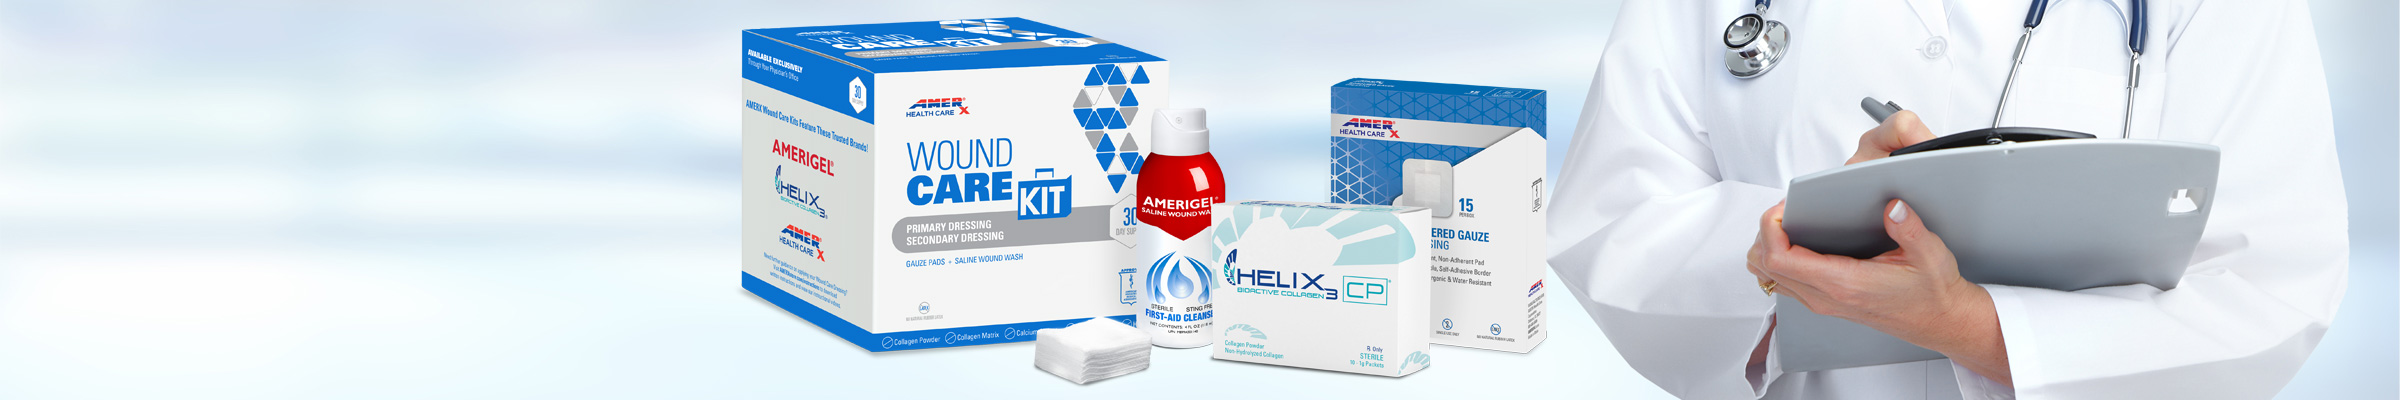 AMERX wound care kit with doctor